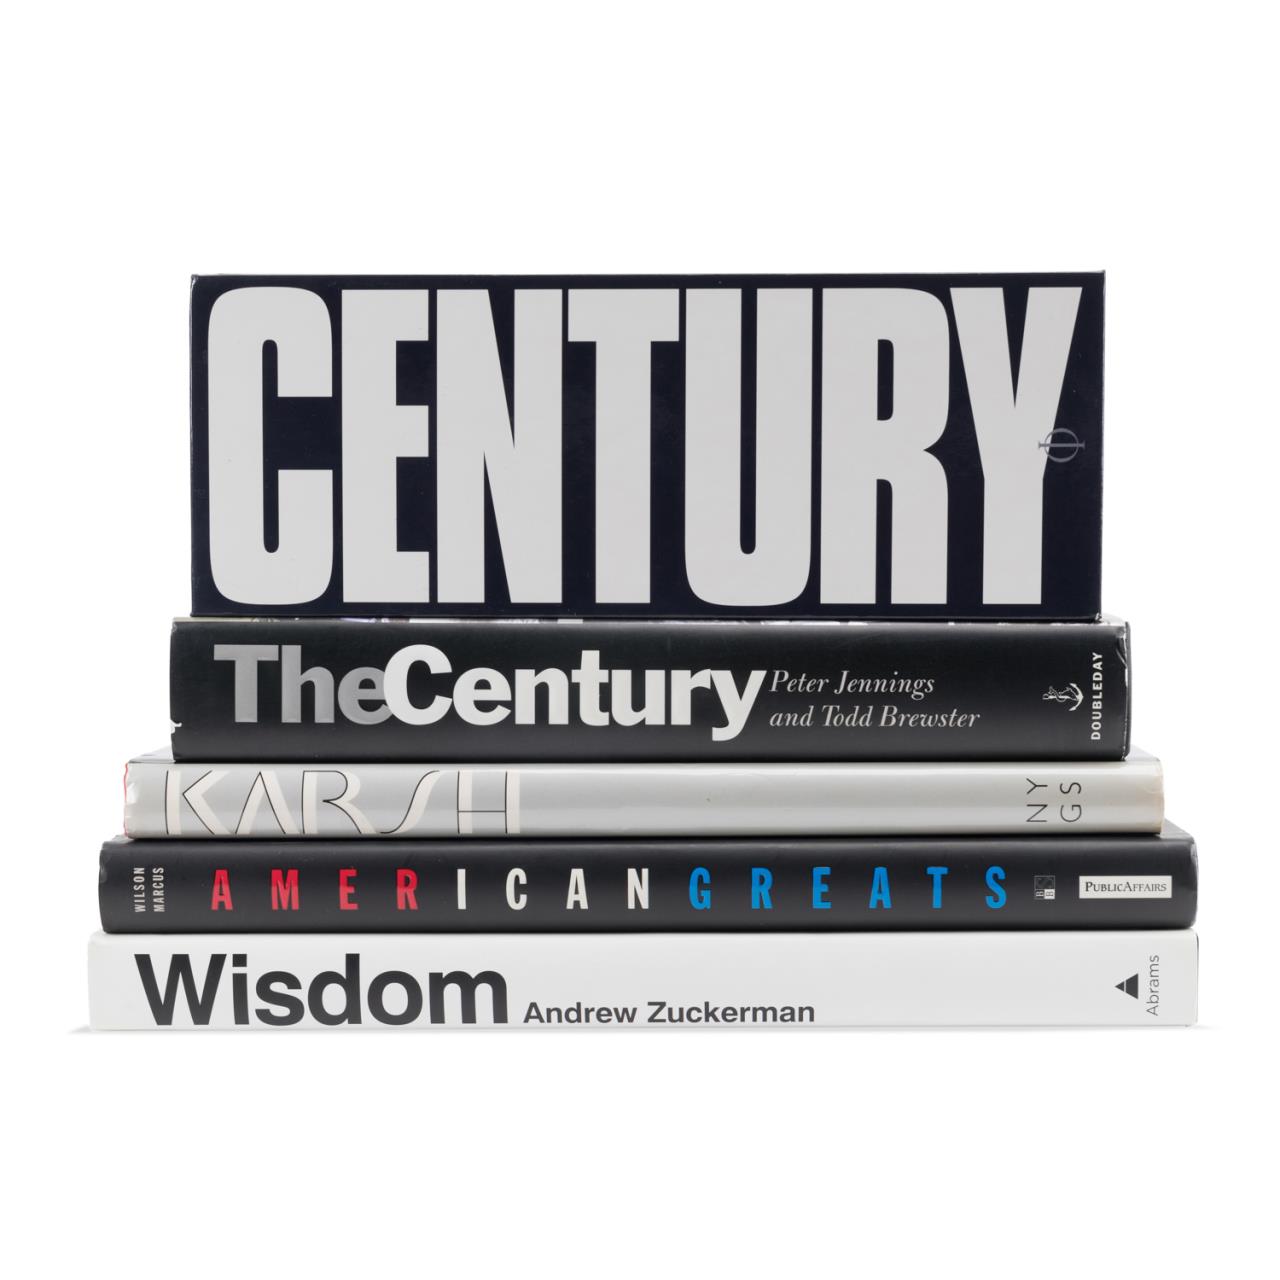 FIVE BOOKS ON THE 20TH CENTURY 2c00a6